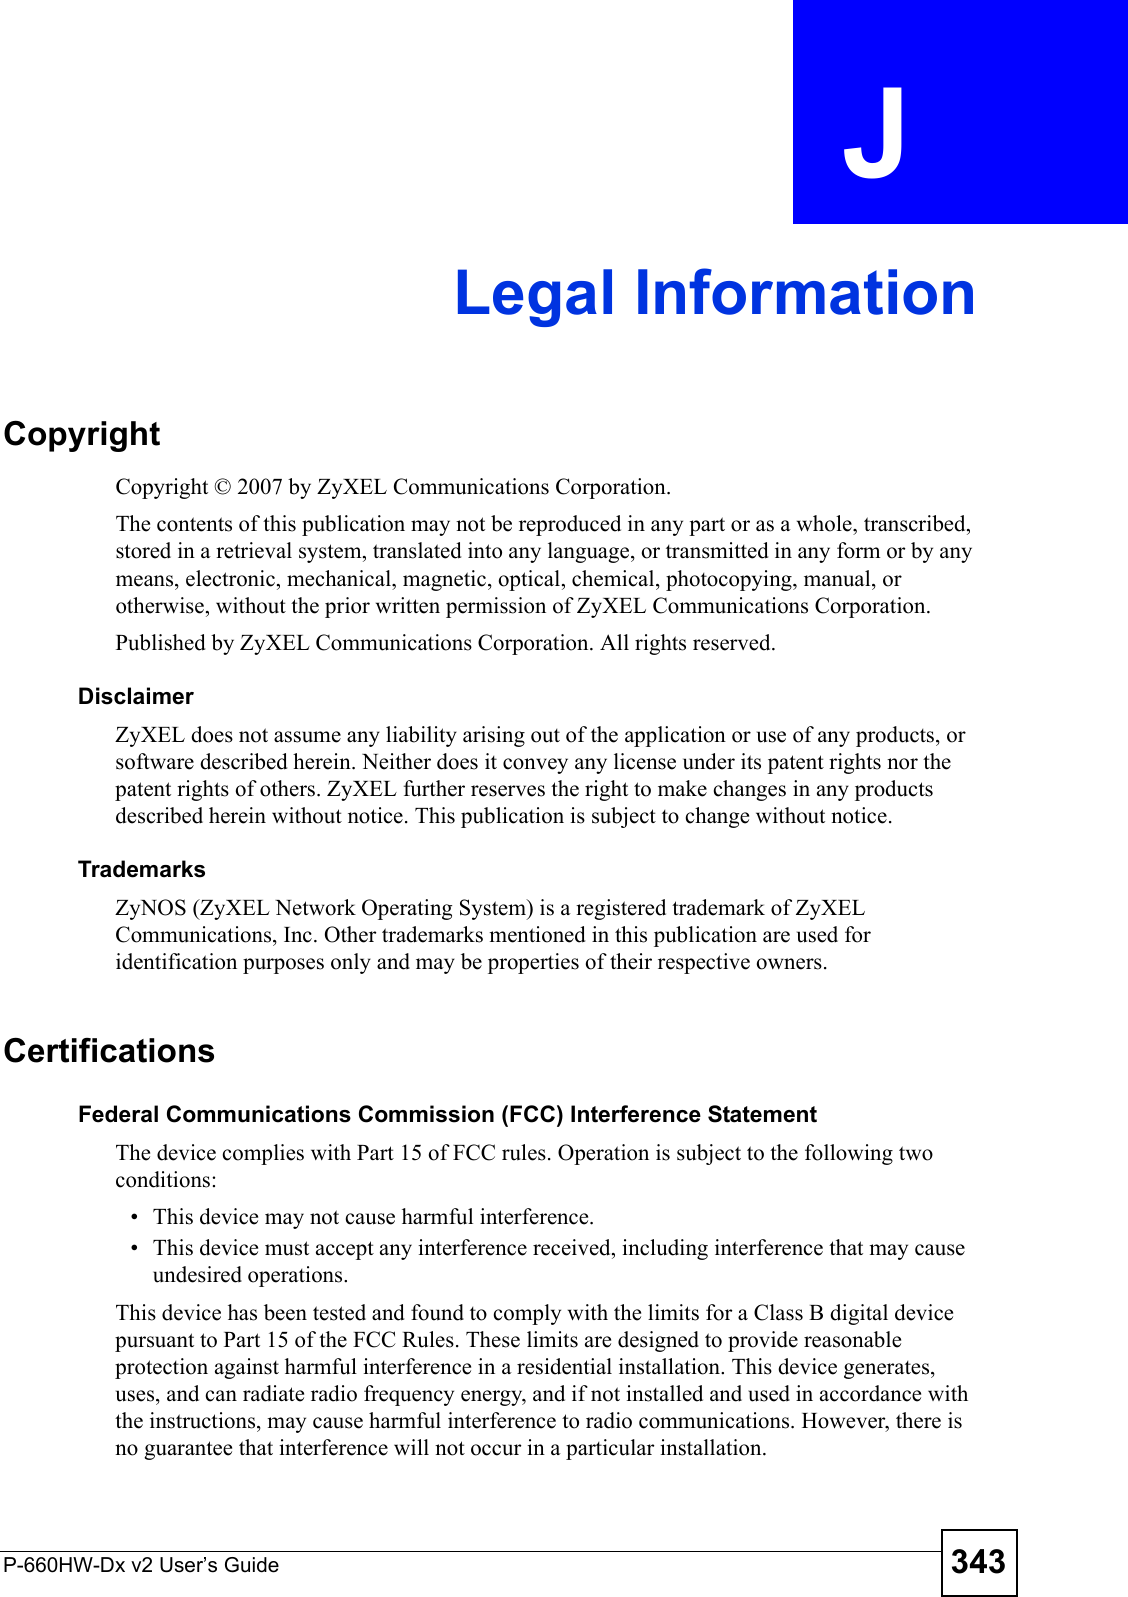 P-660HW-Dx v2 User’s Guide 343APPENDIX  J Legal InformationCopyrightCopyright © 2007 by ZyXEL Communications Corporation.The contents of this publication may not be reproduced in any part or as a whole, transcribed, stored in a retrieval system, translated into any language, or transmitted in any form or by any means, electronic, mechanical, magnetic, optical, chemical, photocopying, manual, or otherwise, without the prior written permission of ZyXEL Communications Corporation.Published by ZyXEL Communications Corporation. All rights reserved.DisclaimerZyXEL does not assume any liability arising out of the application or use of any products, or software described herein. Neither does it convey any license under its patent rights nor the patent rights of others. ZyXEL further reserves the right to make changes in any products described herein without notice. This publication is subject to change without notice.TrademarksZyNOS (ZyXEL Network Operating System) is a registered trademark of ZyXEL Communications, Inc. Other trademarks mentioned in this publication are used for identification purposes only and may be properties of their respective owners.CertificationsFederal Communications Commission (FCC) Interference StatementThe device complies with Part 15 of FCC rules. Operation is subject to the following two conditions:• This device may not cause harmful interference.• This device must accept any interference received, including interference that may cause undesired operations.This device has been tested and found to comply with the limits for a Class B digital device pursuant to Part 15 of the FCC Rules. These limits are designed to provide reasonable protection against harmful interference in a residential installation. This device generates, uses, and can radiate radio frequency energy, and if not installed and used in accordance with the instructions, may cause harmful interference to radio communications. However, there is no guarantee that interference will not occur in a particular installation.